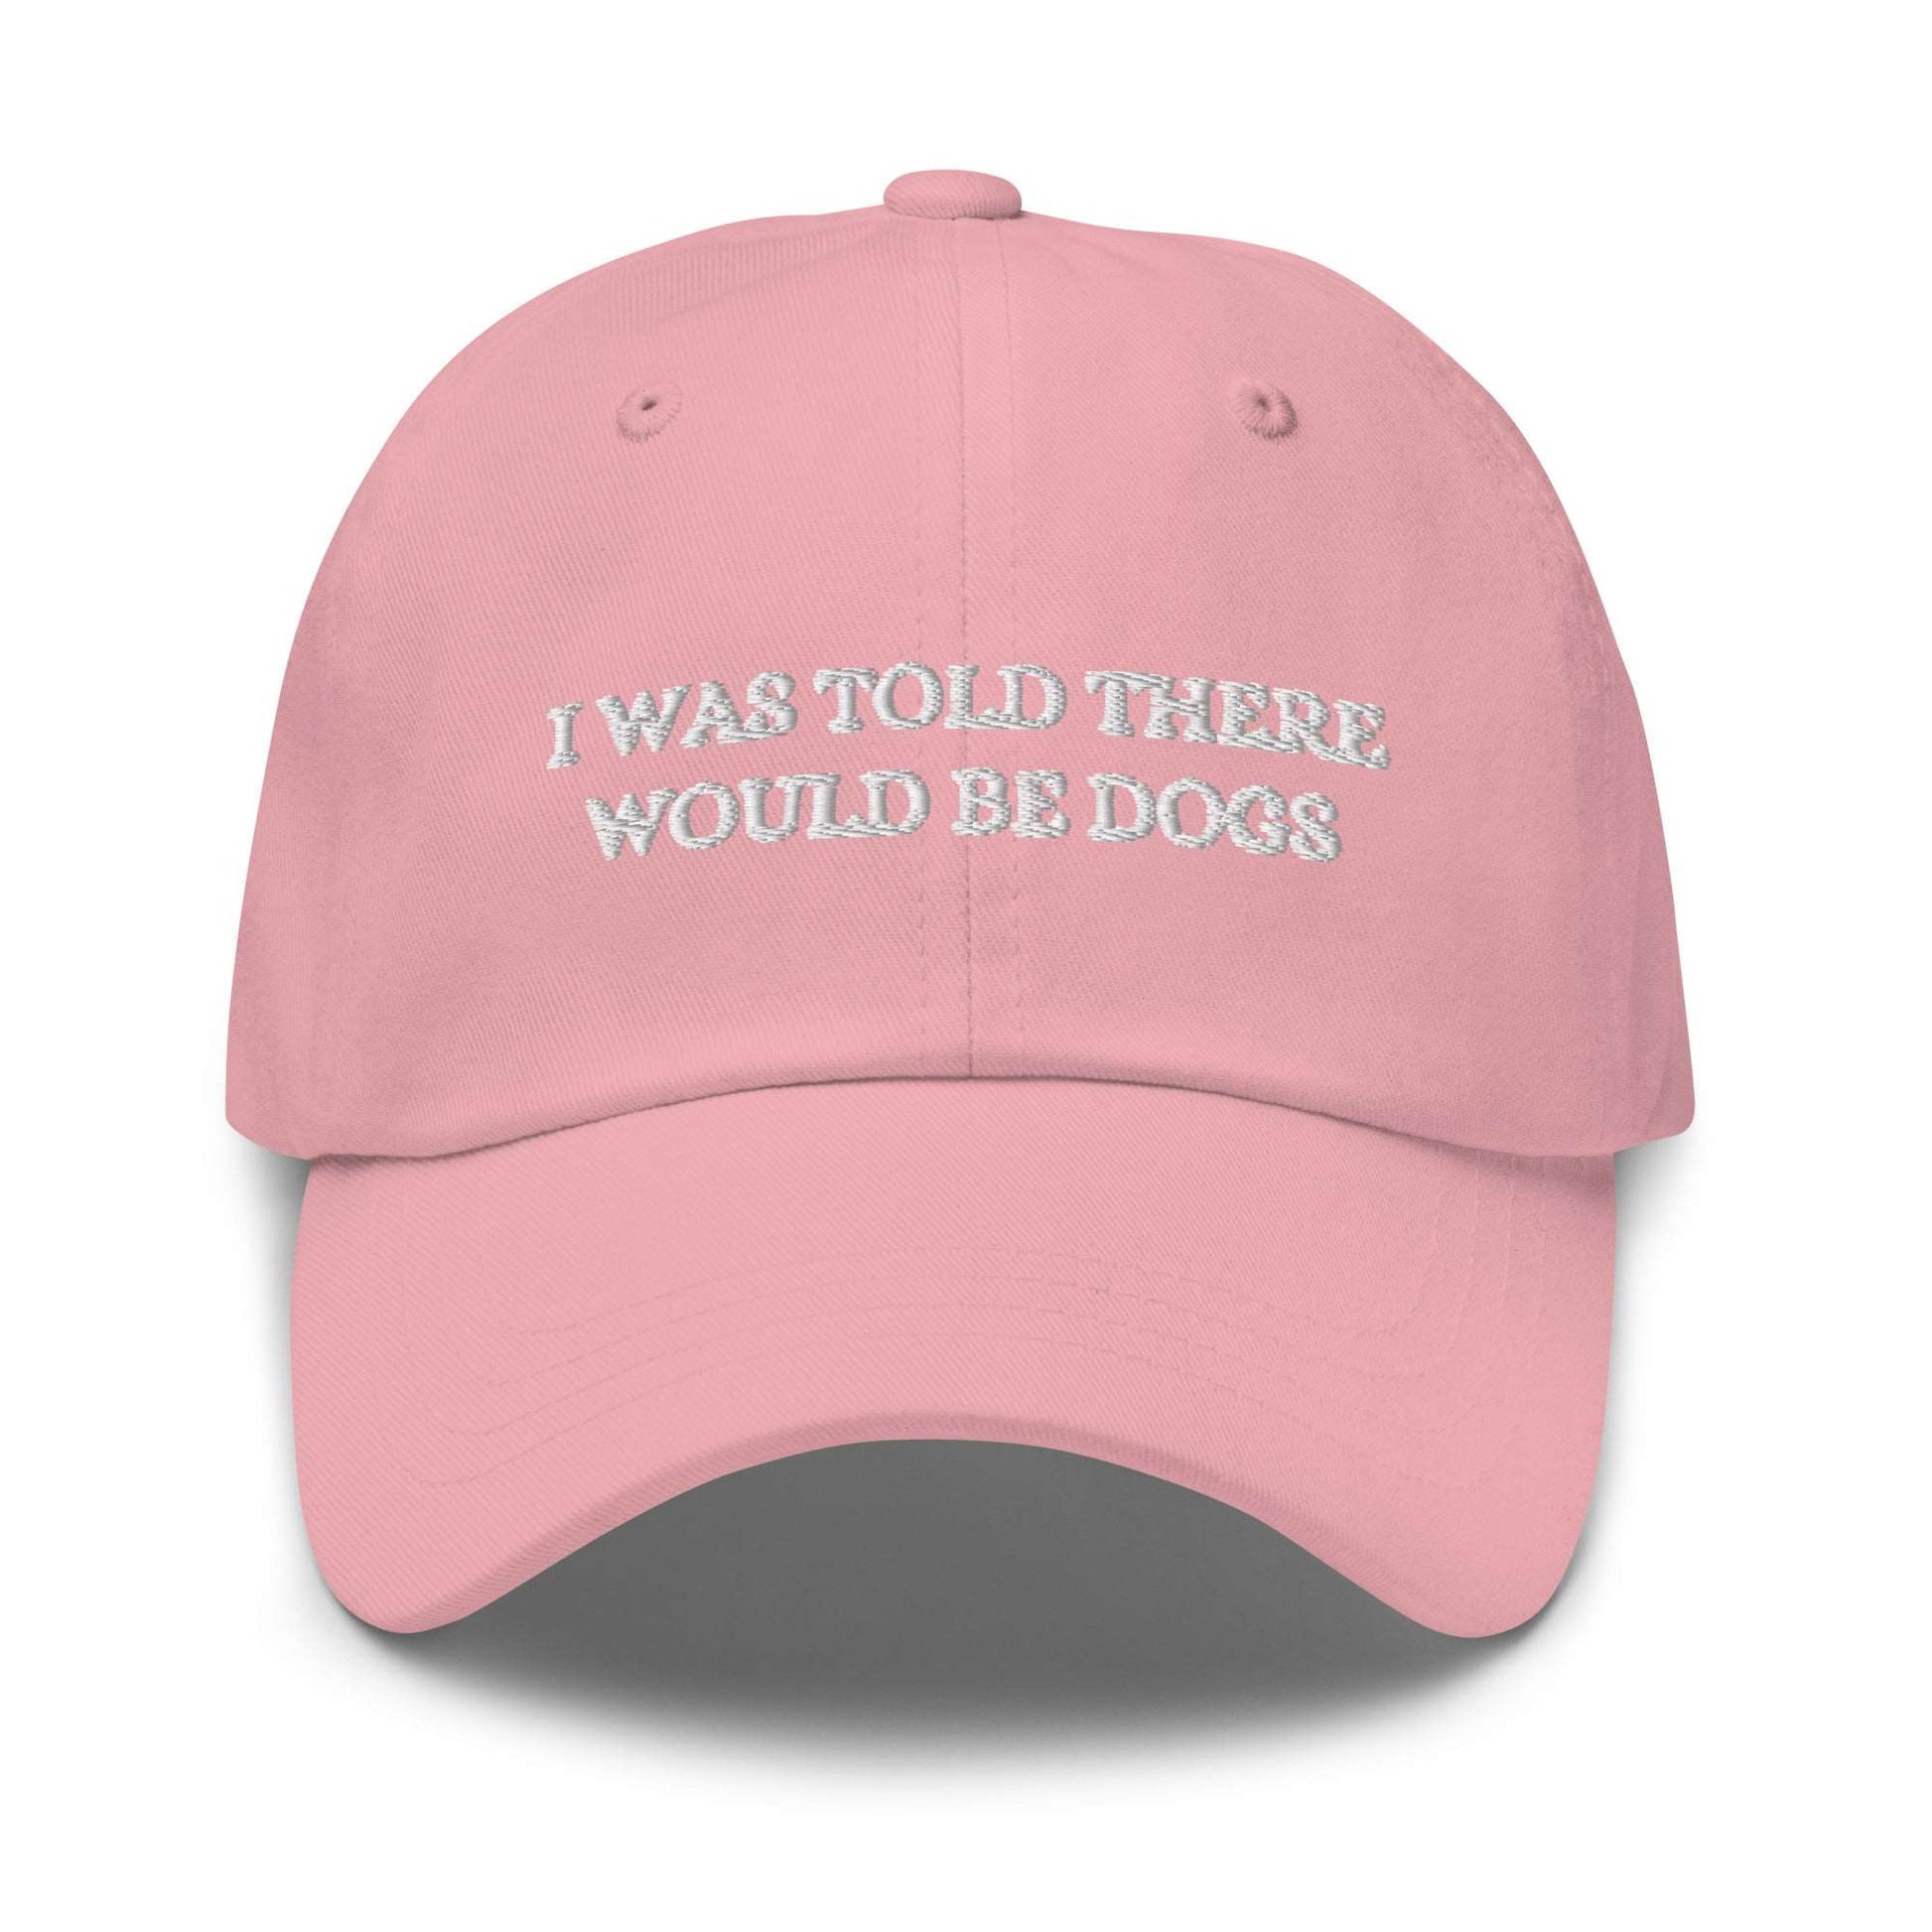 I Was Told There Would Be Dogs Dad hat